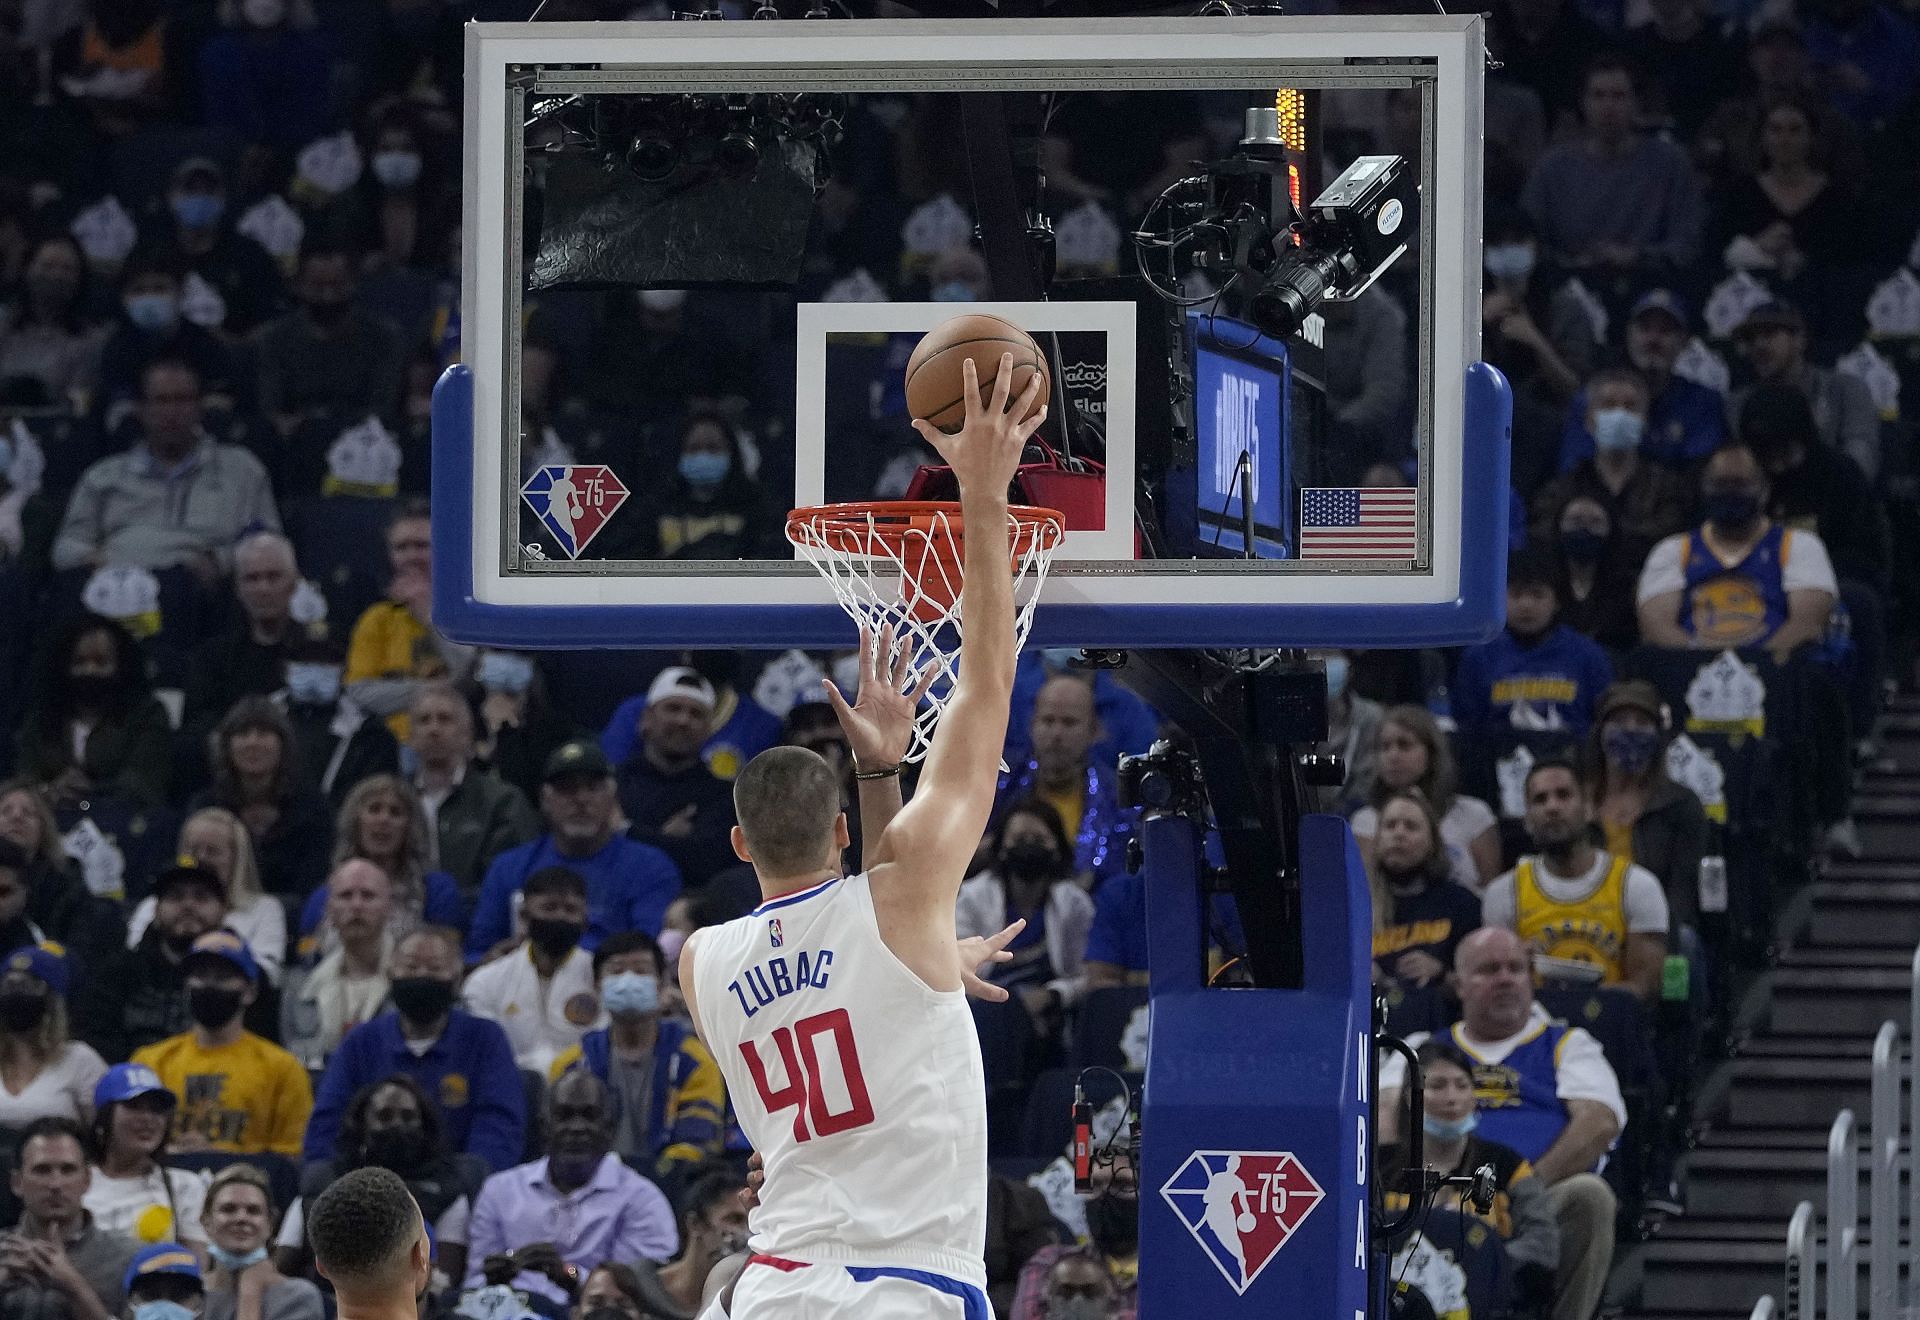 The LA Clippers lost to the Golden State Warriors in their season opener.